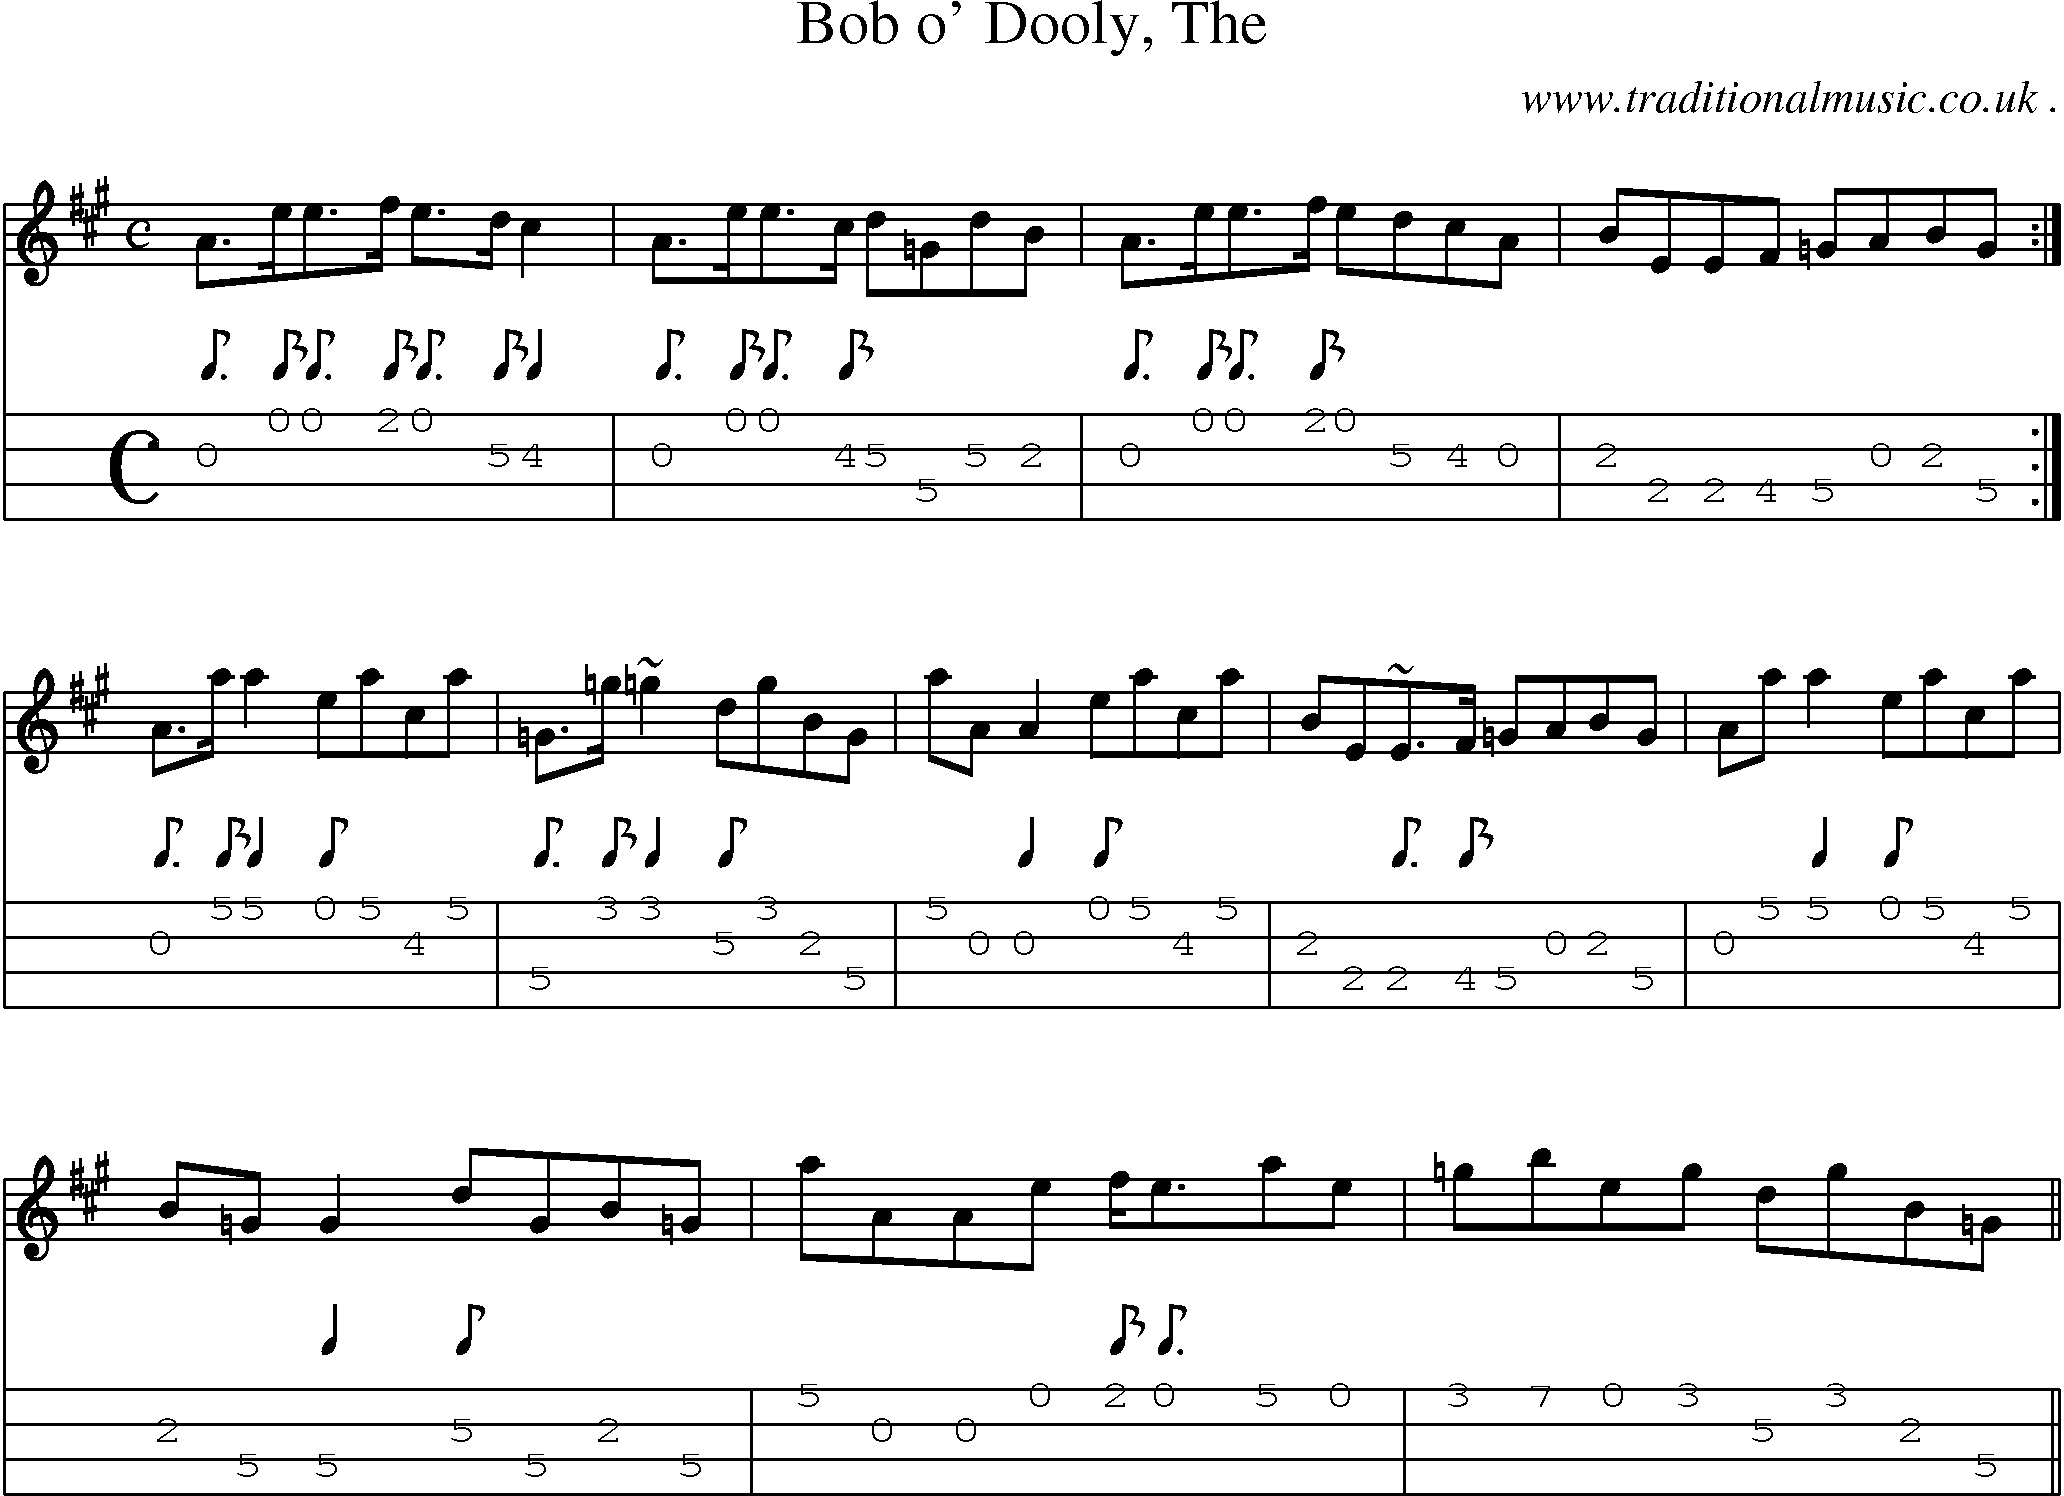 Sheet-music  score, Chords and Mandolin Tabs for Bob O Dooly The